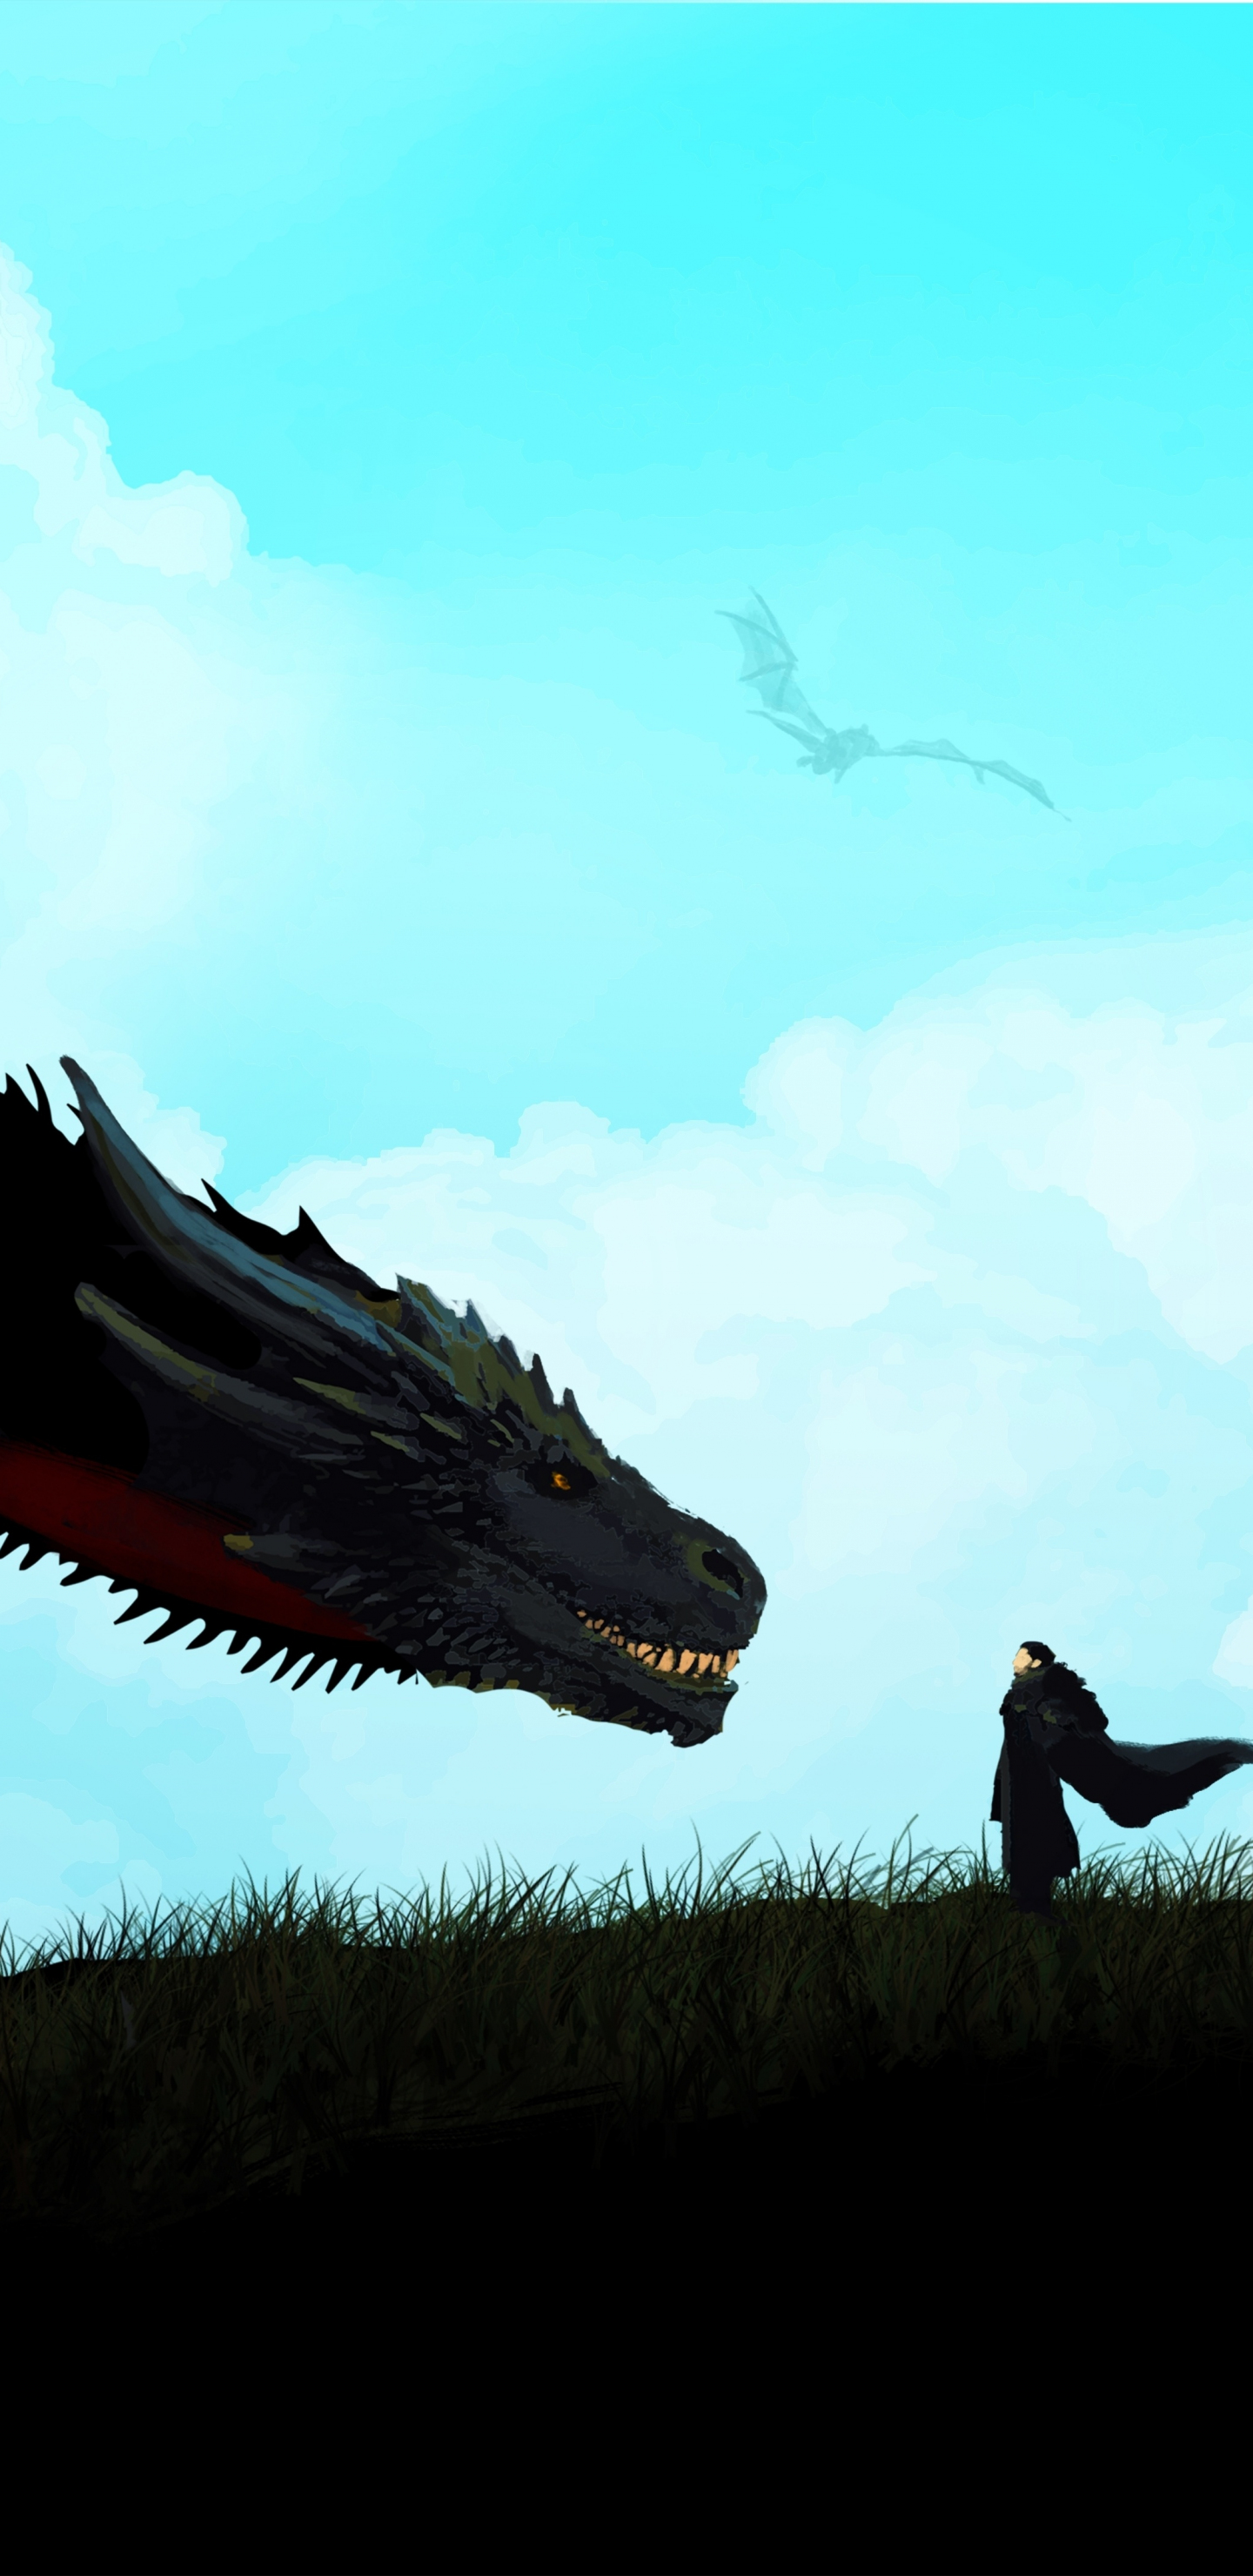 Download 1440x2960 Wallpaper Jon Snow And Dragon Game Of Thrones